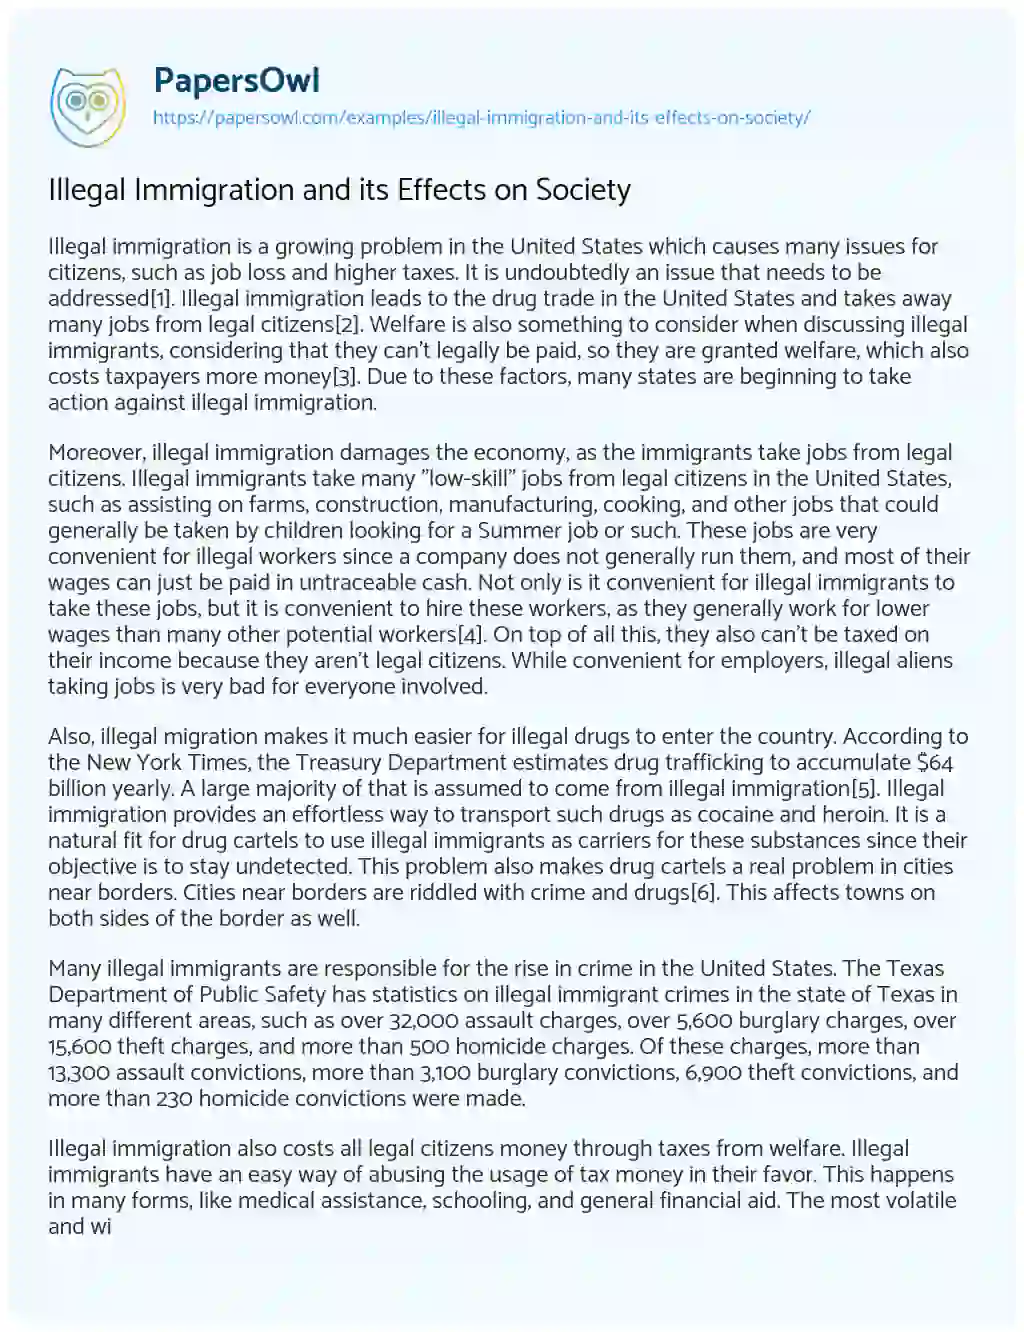 Illegal Immigration and its Effects on Society essay